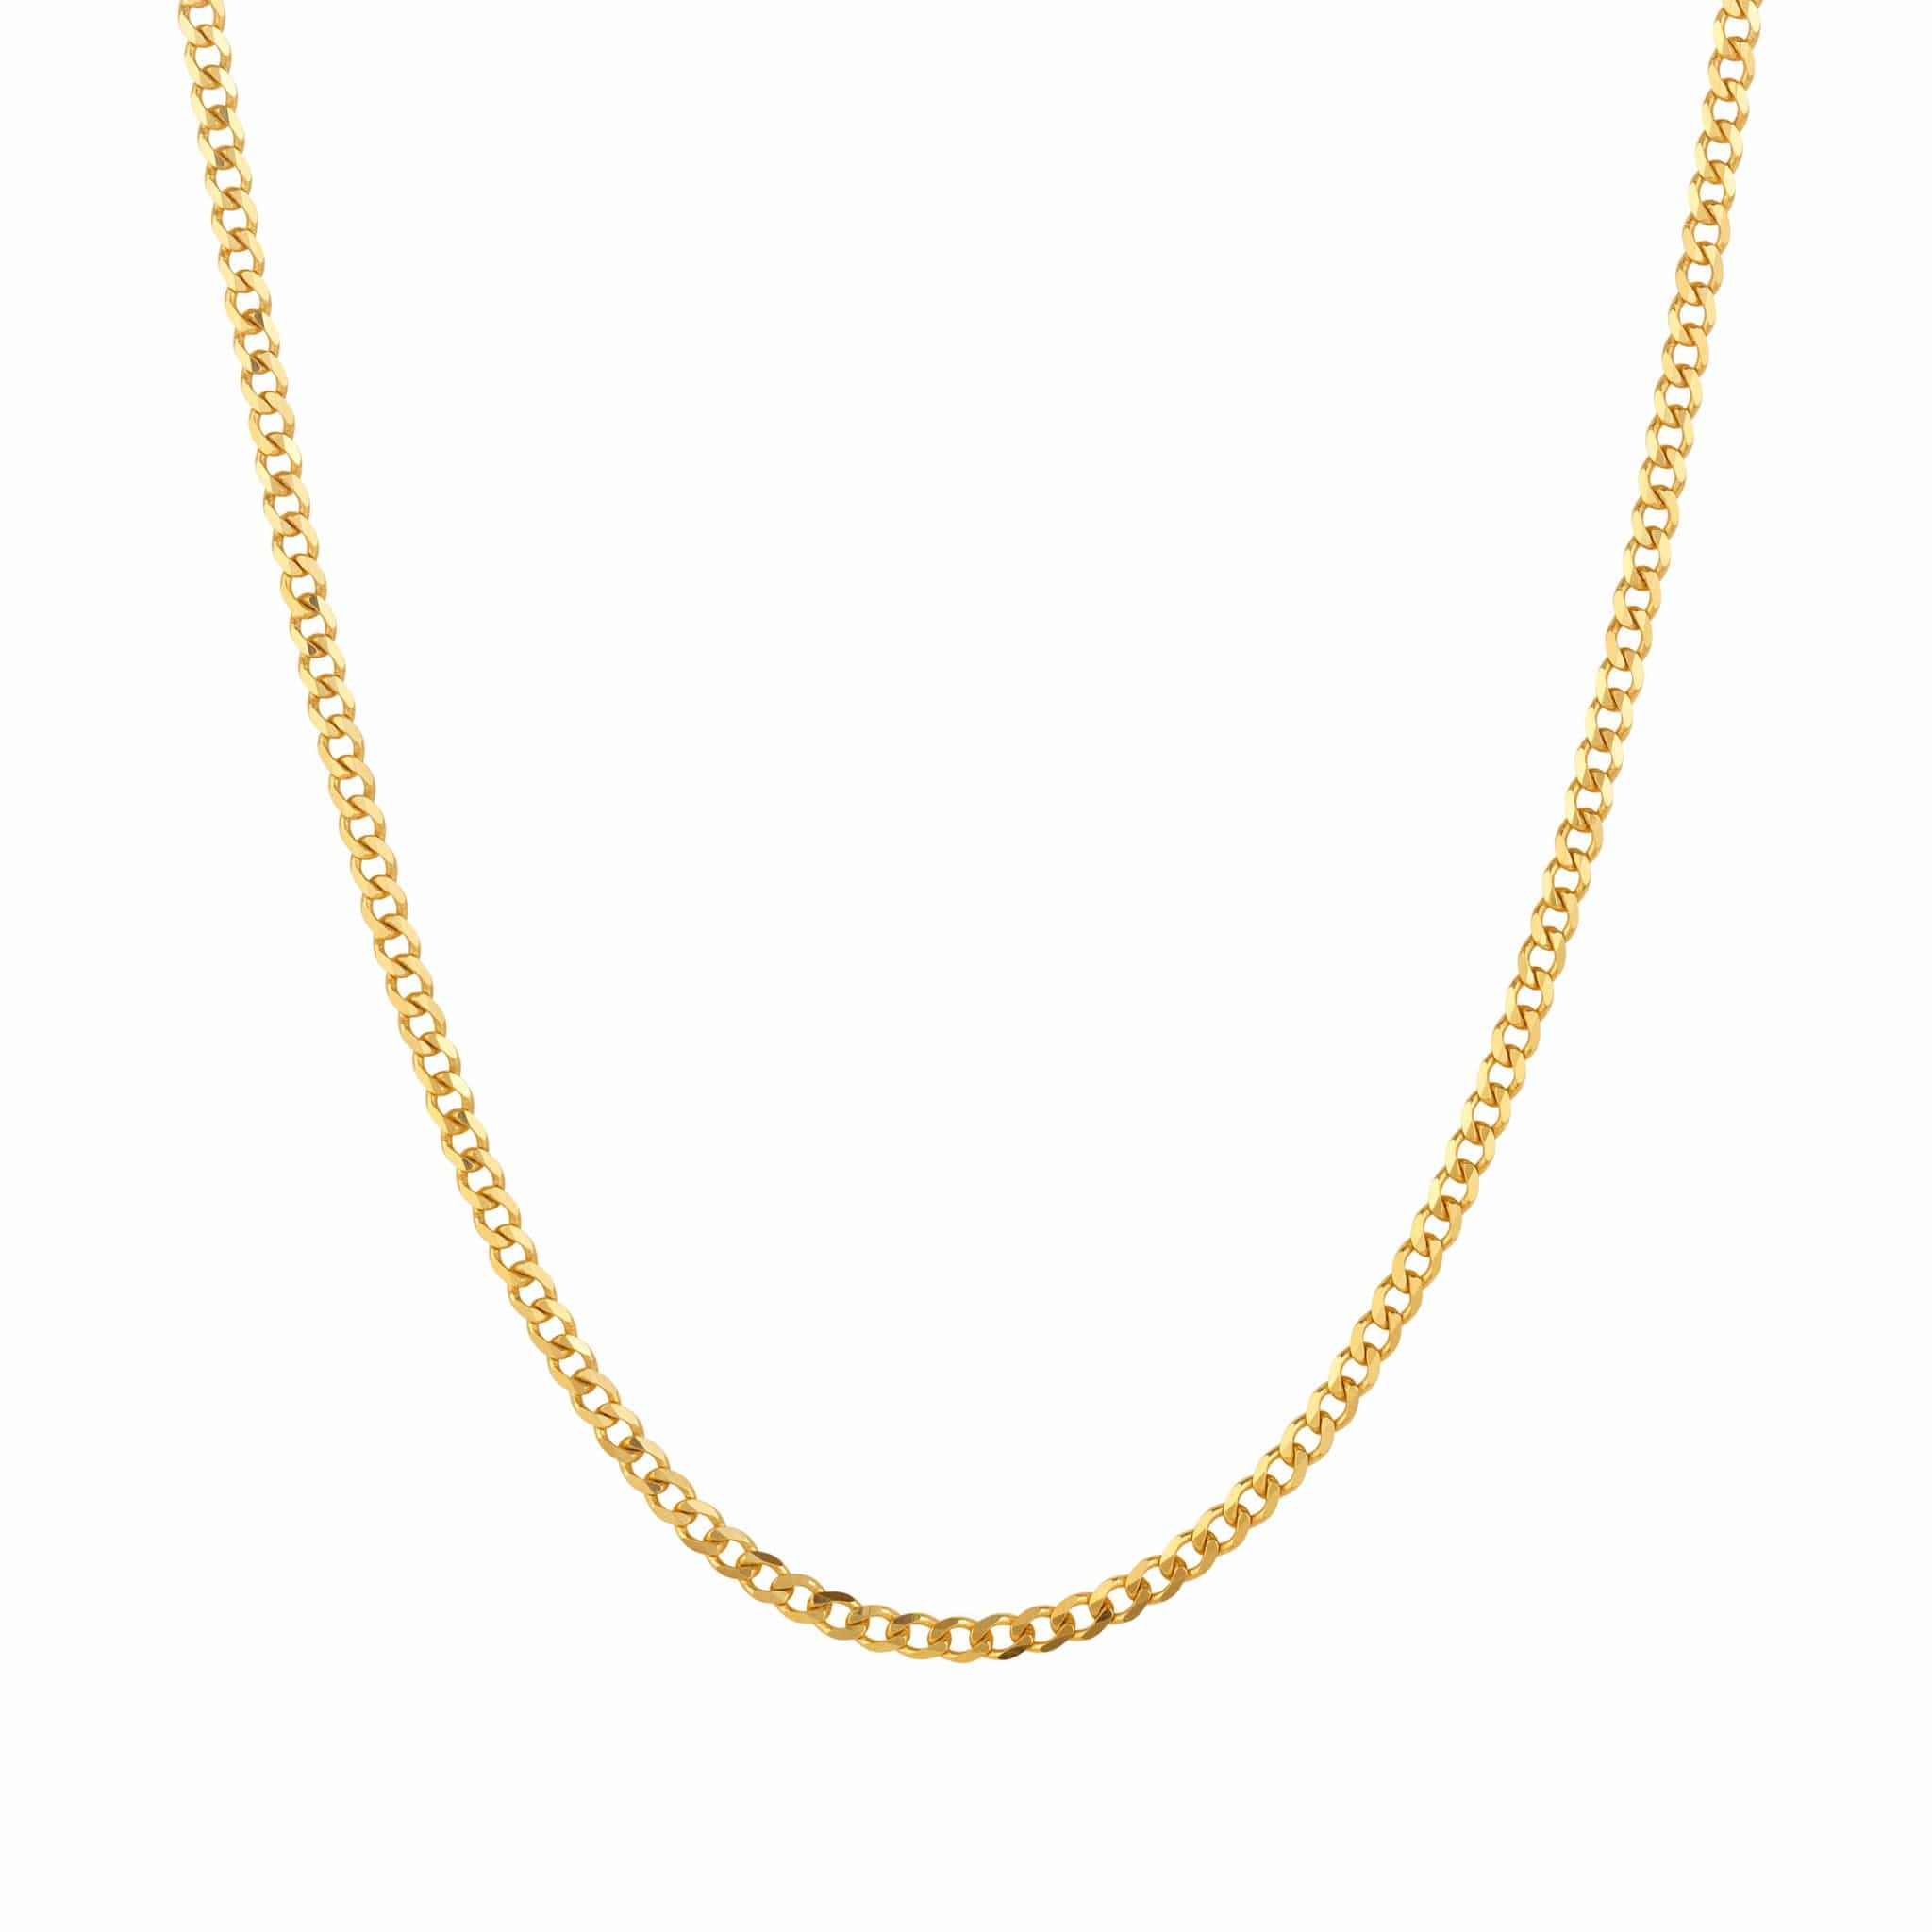 A dainty gold anklet displayed against a white background.